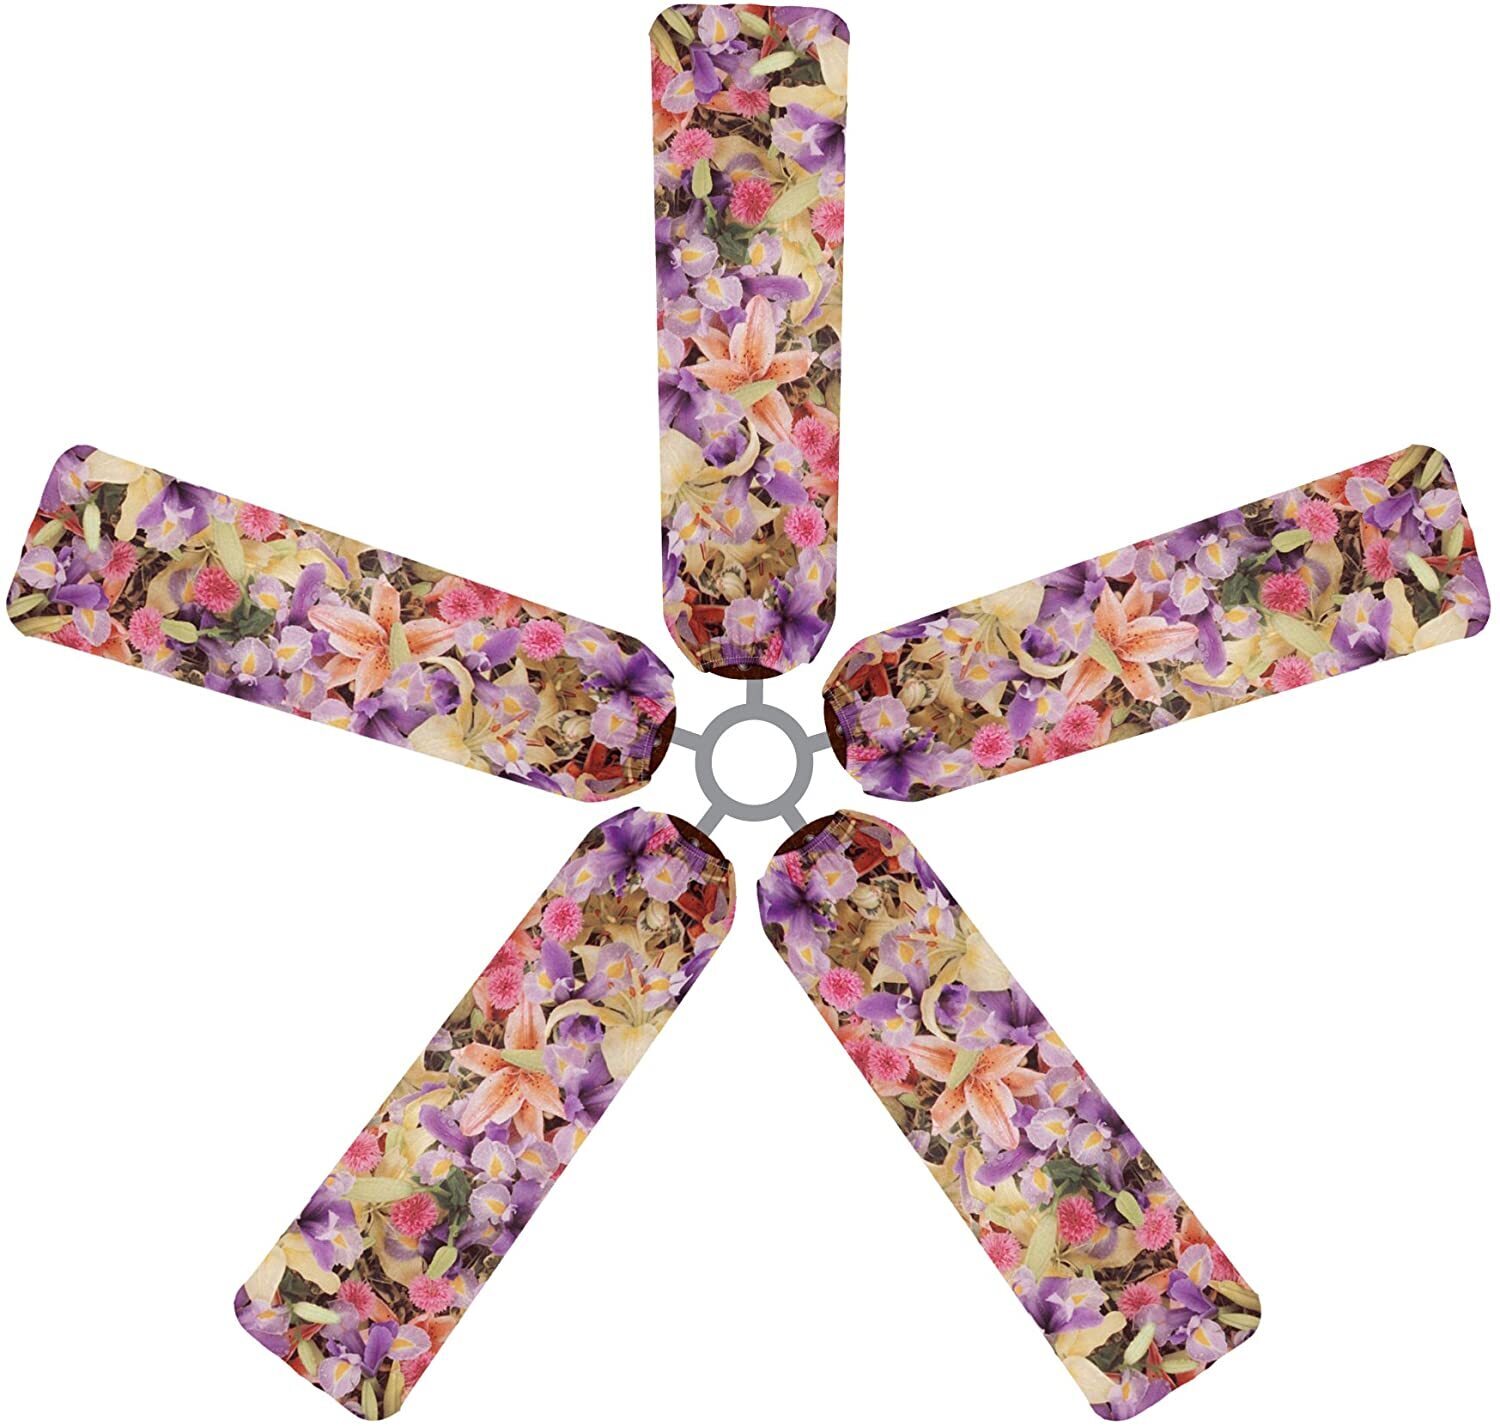 Floral Fan Blade Covers